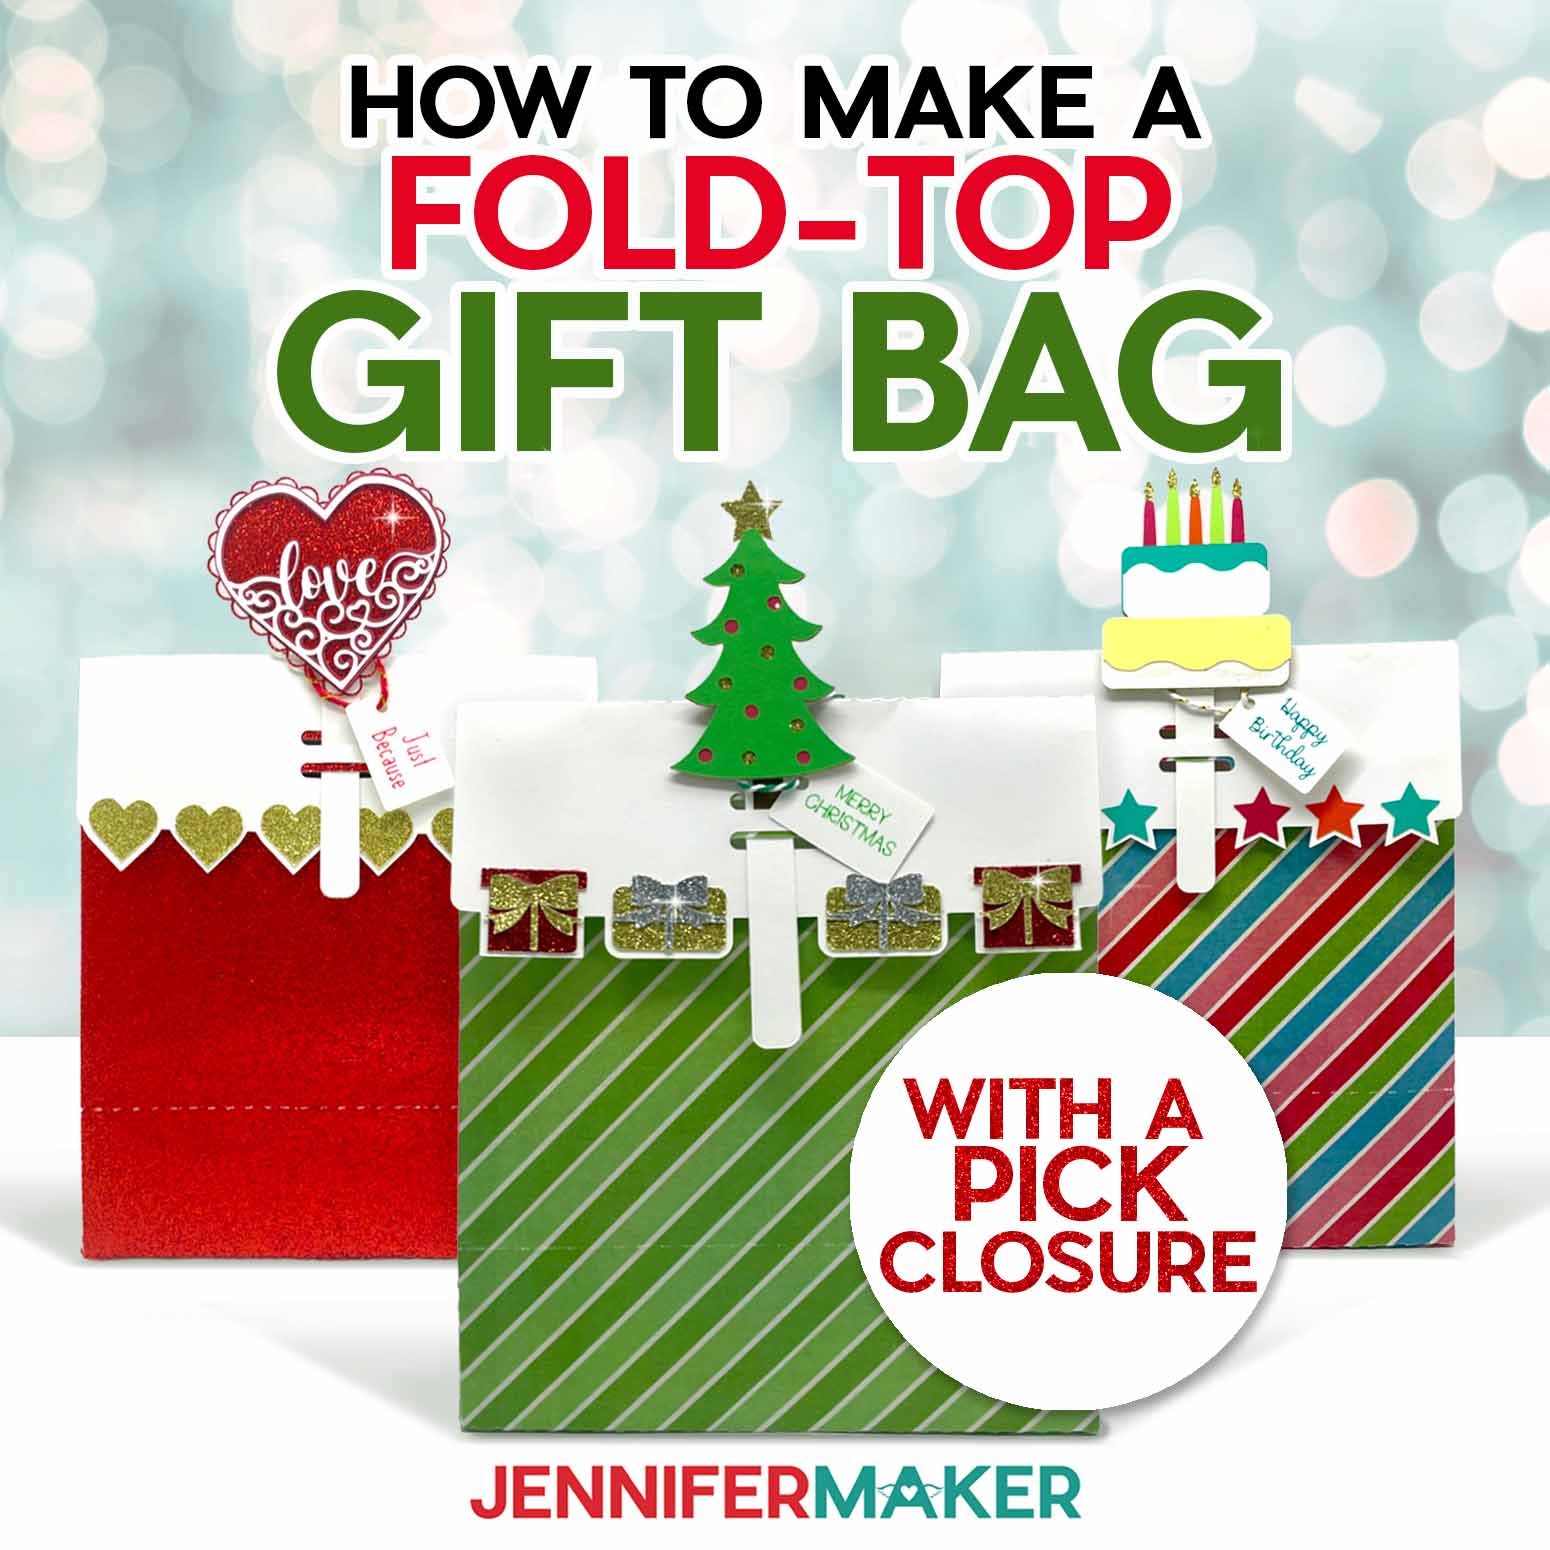 How To Make A Fold-Top Gift Bag With Pick Closure